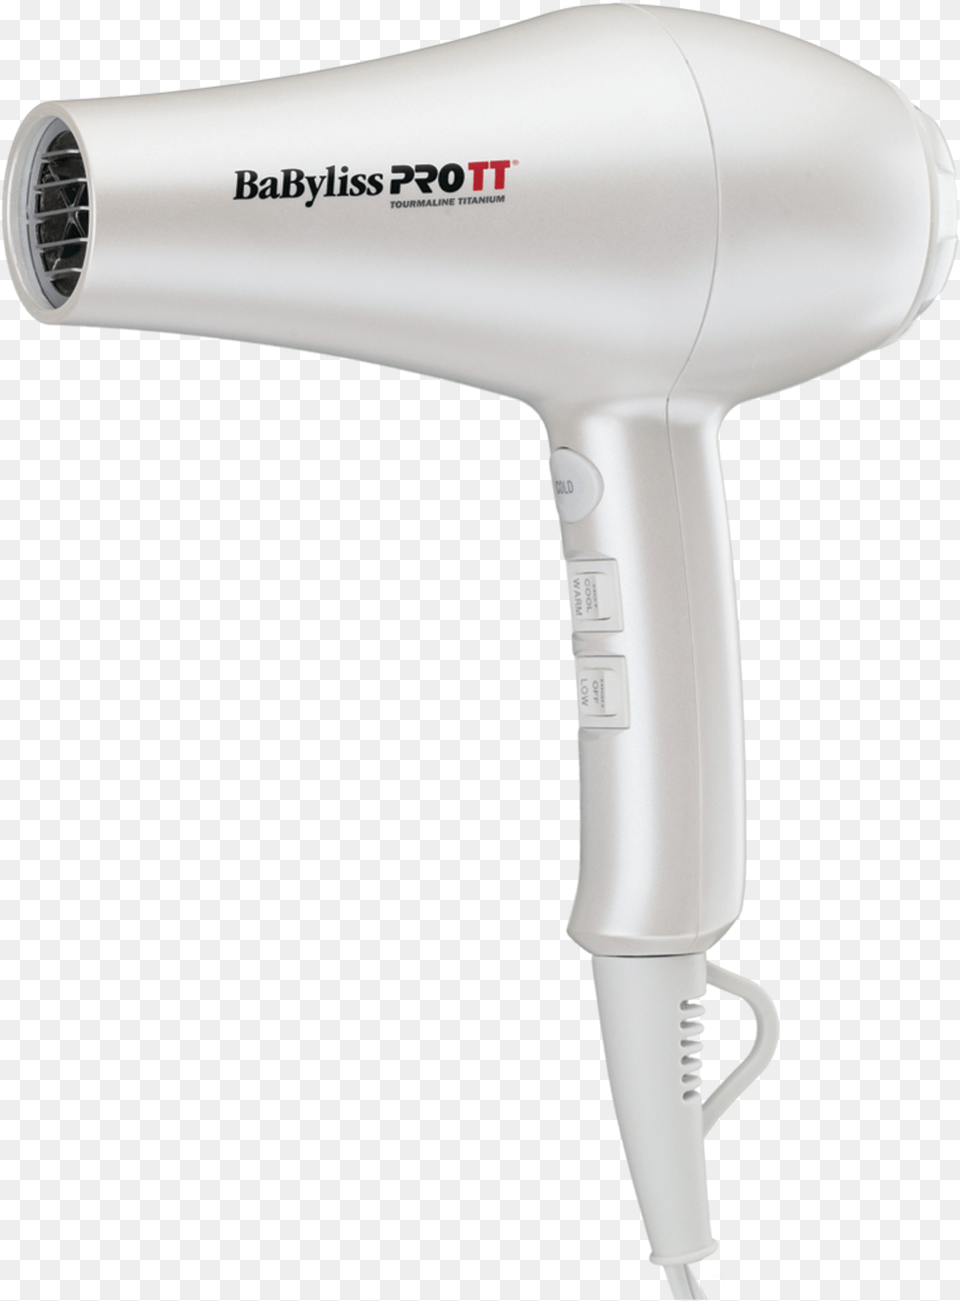 Babyliss Tourmaline Dryer Hair Dryer, Appliance, Device, Electrical Device, Blow Dryer Free Transparent Png